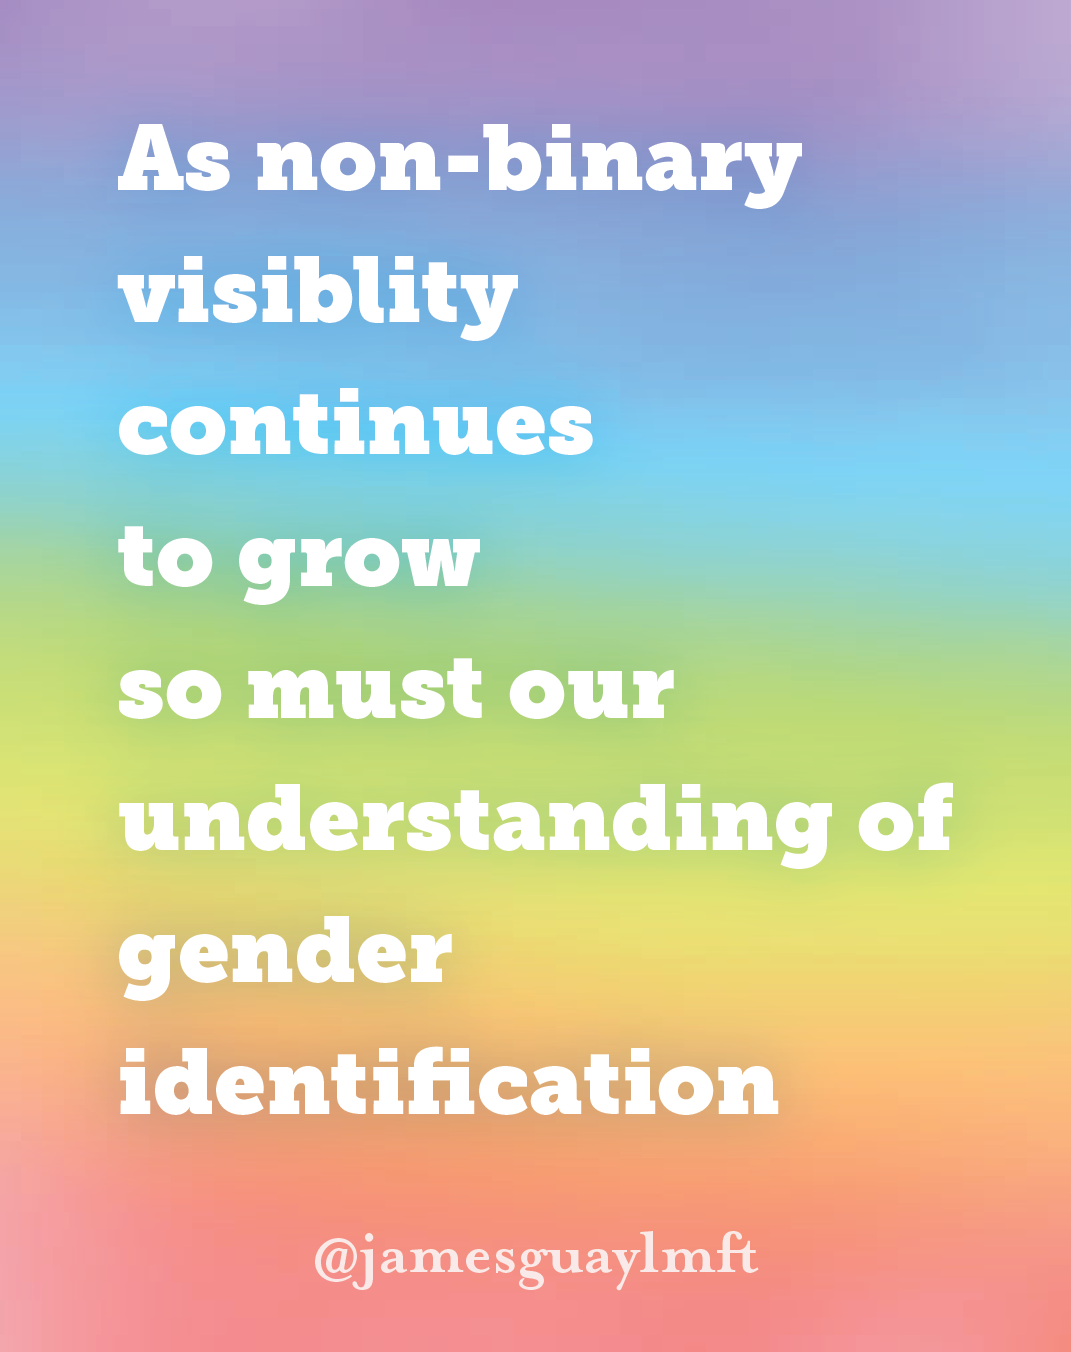 Non-binary visibility is growing